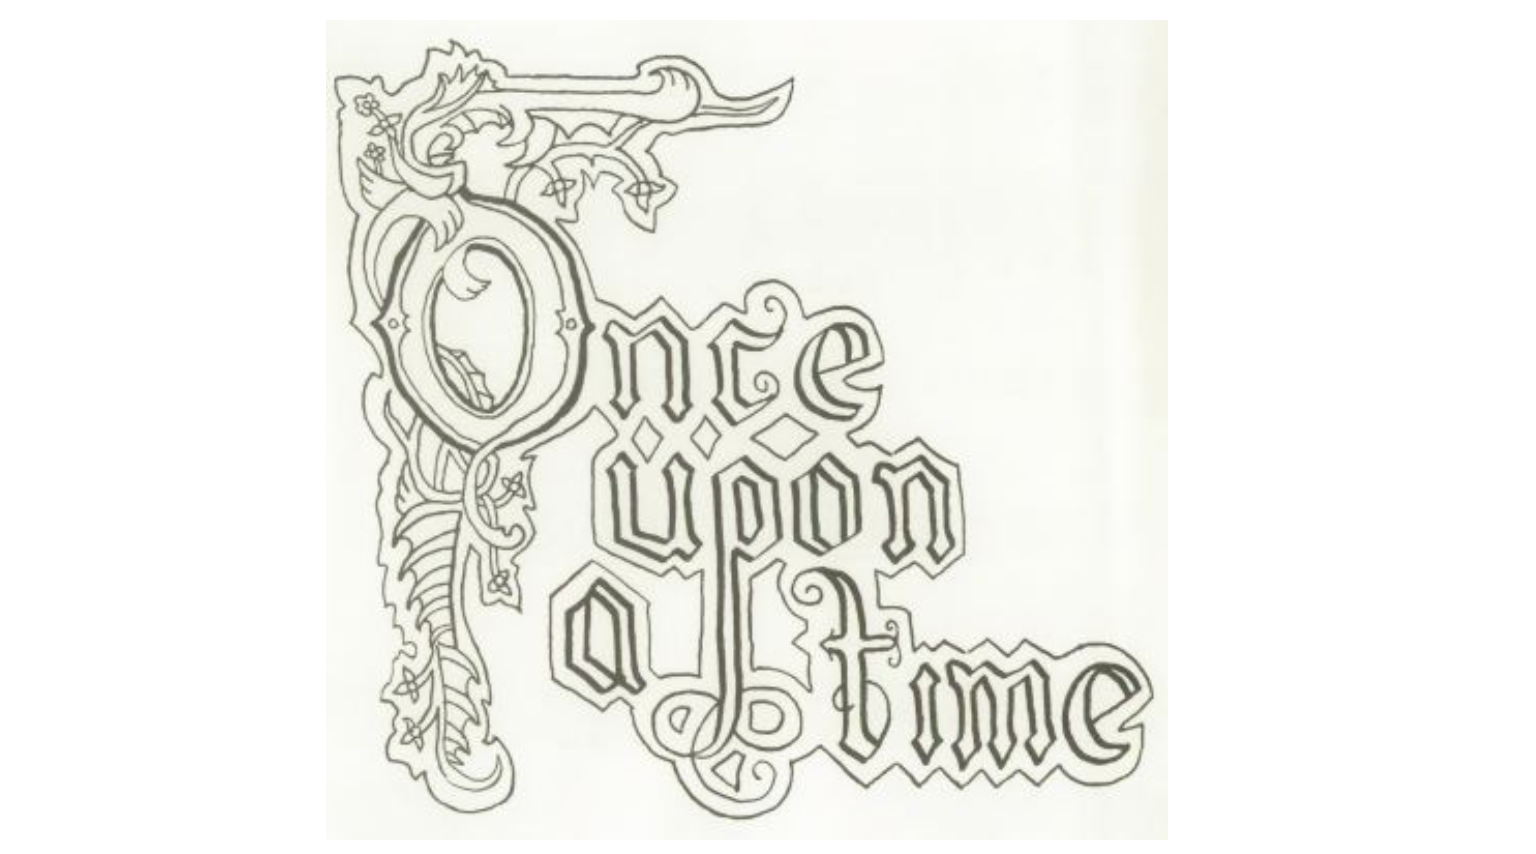 Once upon a time in old English font.